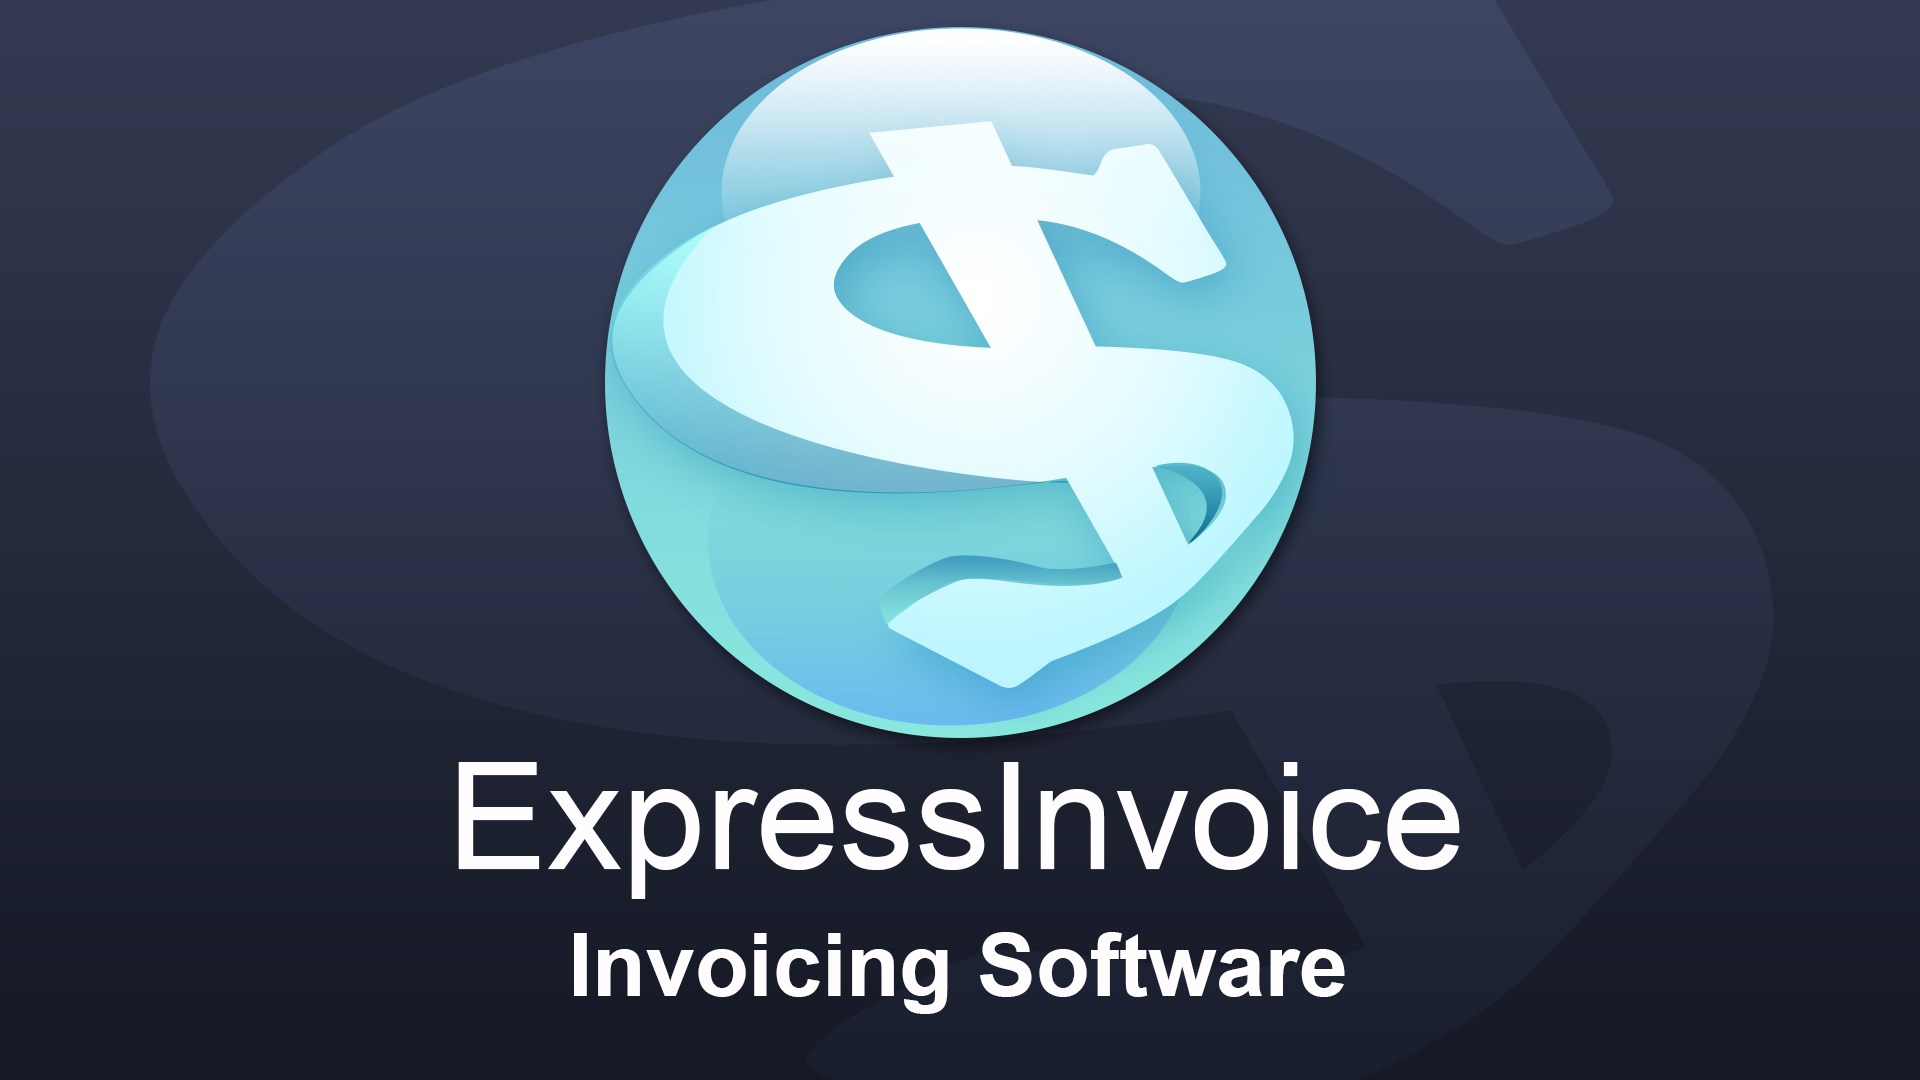 NCH: Express Invoice Invoicing Key, 203.62$